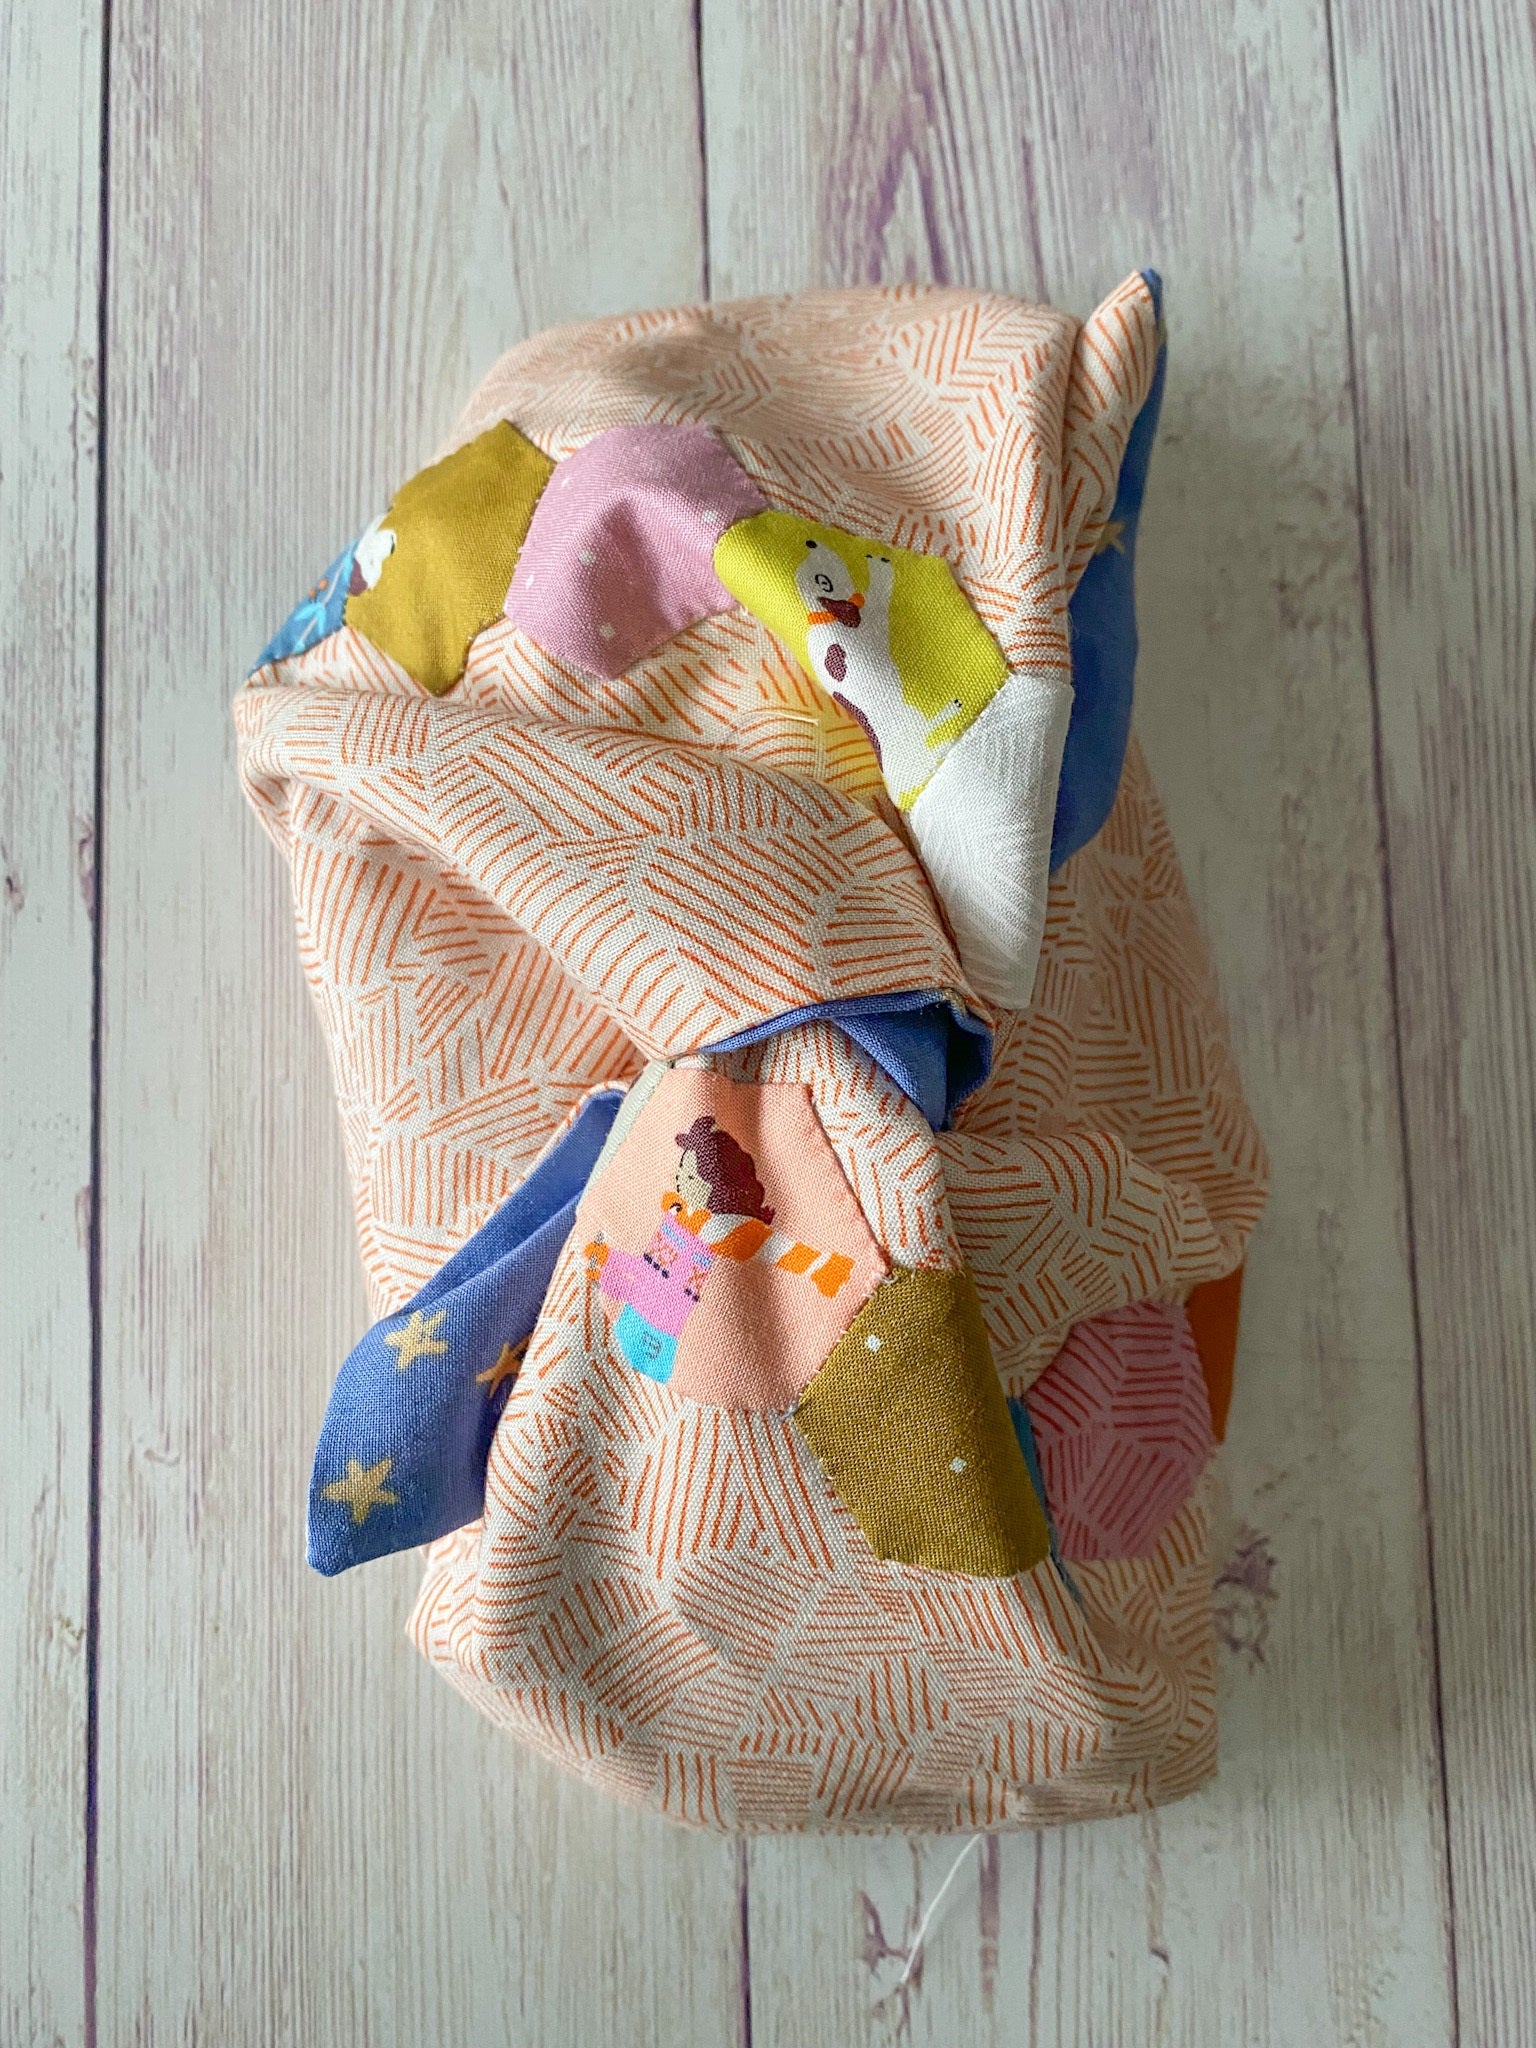 DIY Tutorial: Make Your Own Posh Knot Bag with This Free Project Sheet